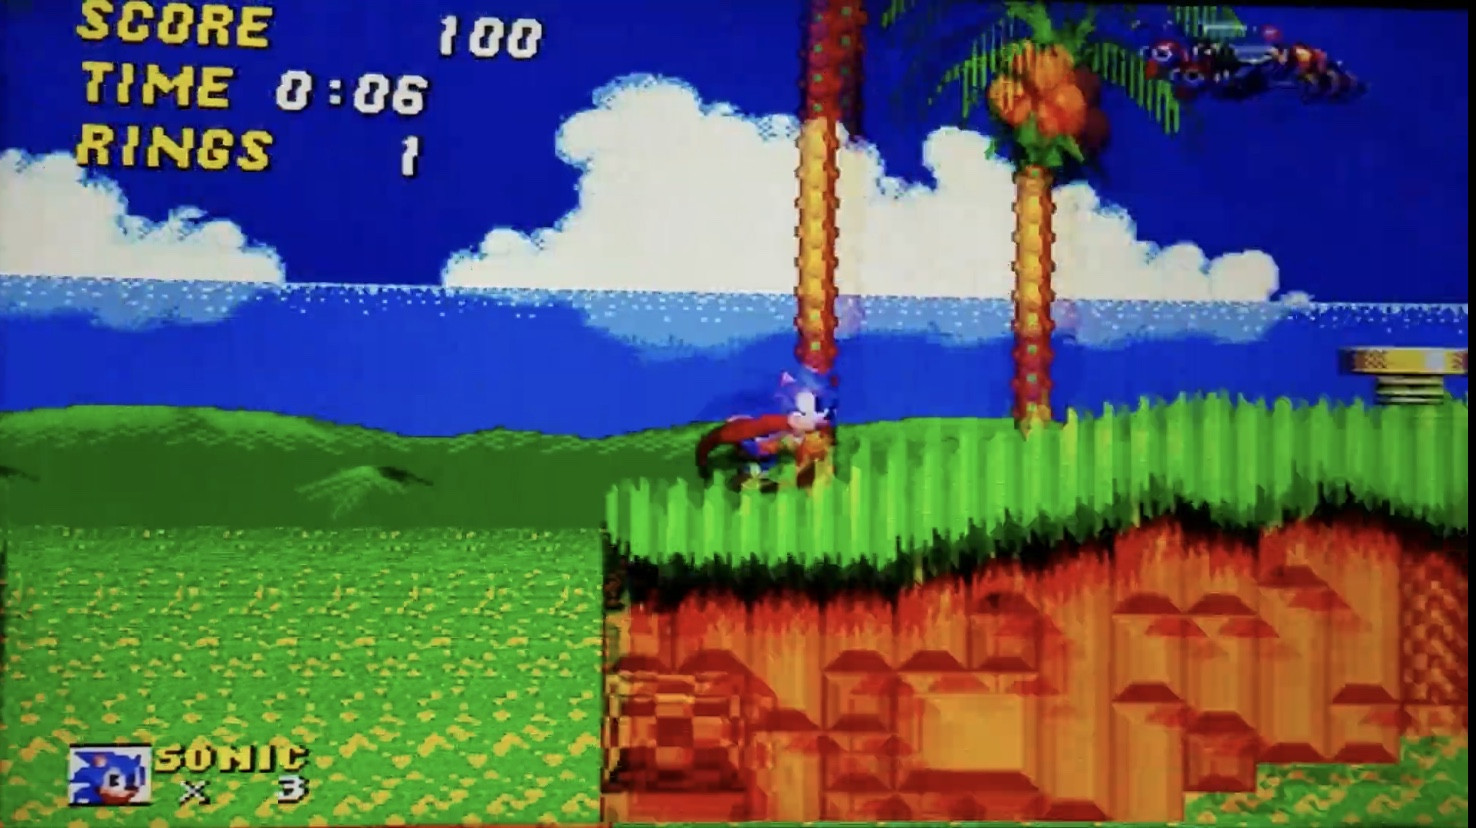 Sonic The Hedgehog 2, Software